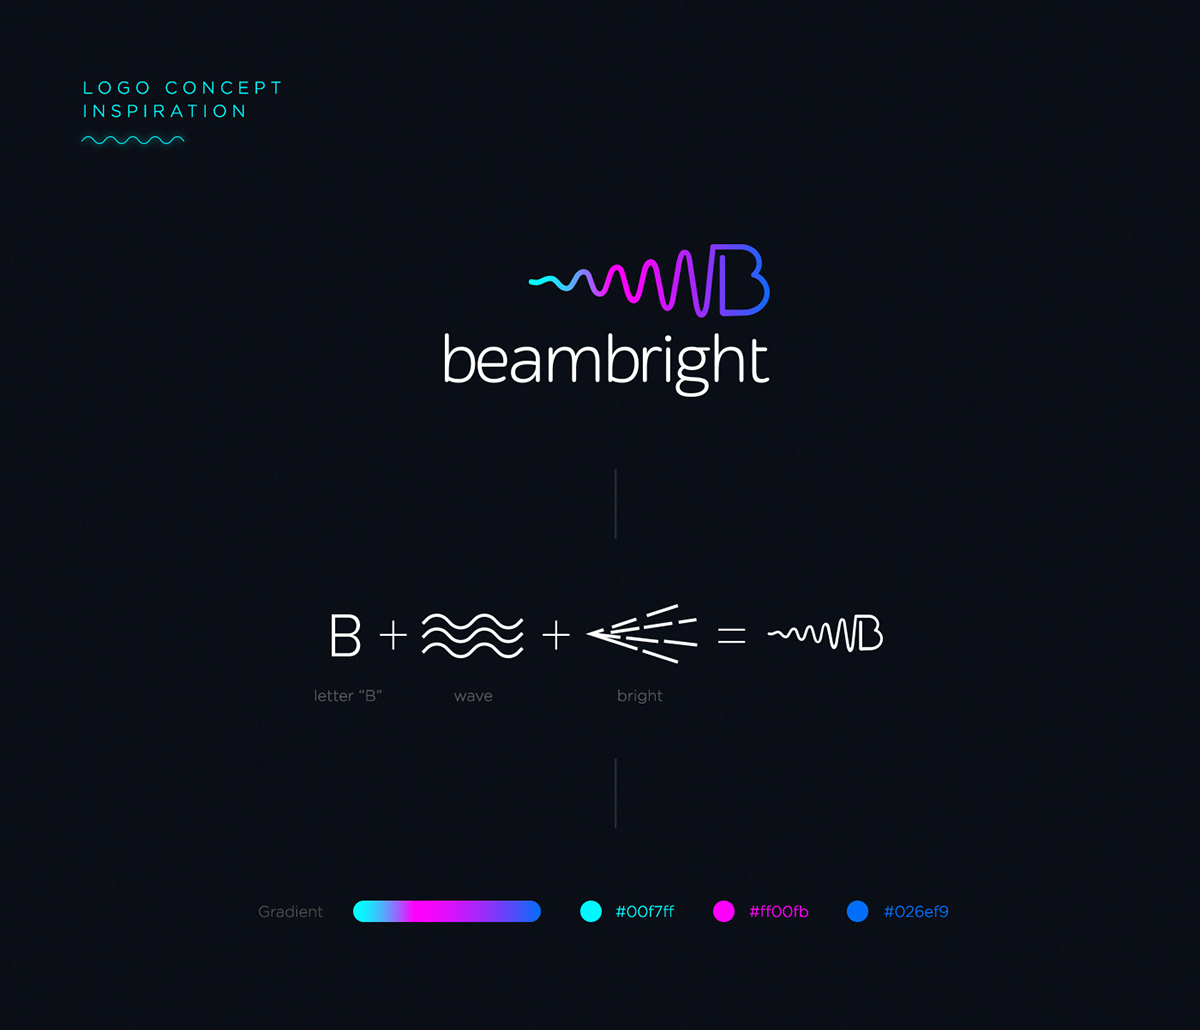 beam bright Internet things Smart intelligent house home concept logo light Web wave icons